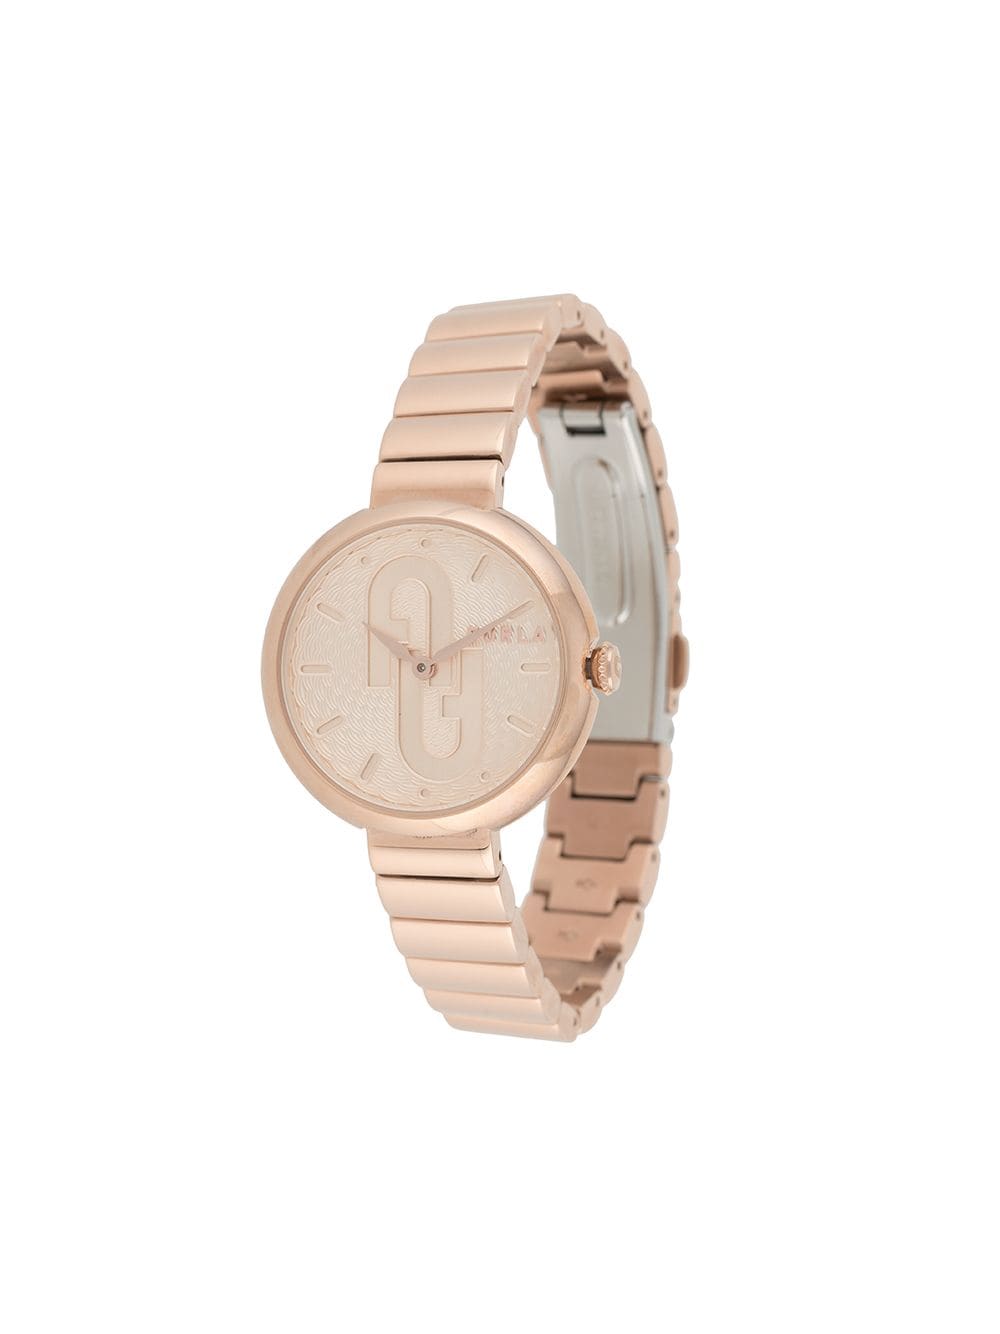 Furla Bubble Round Watch In Gold